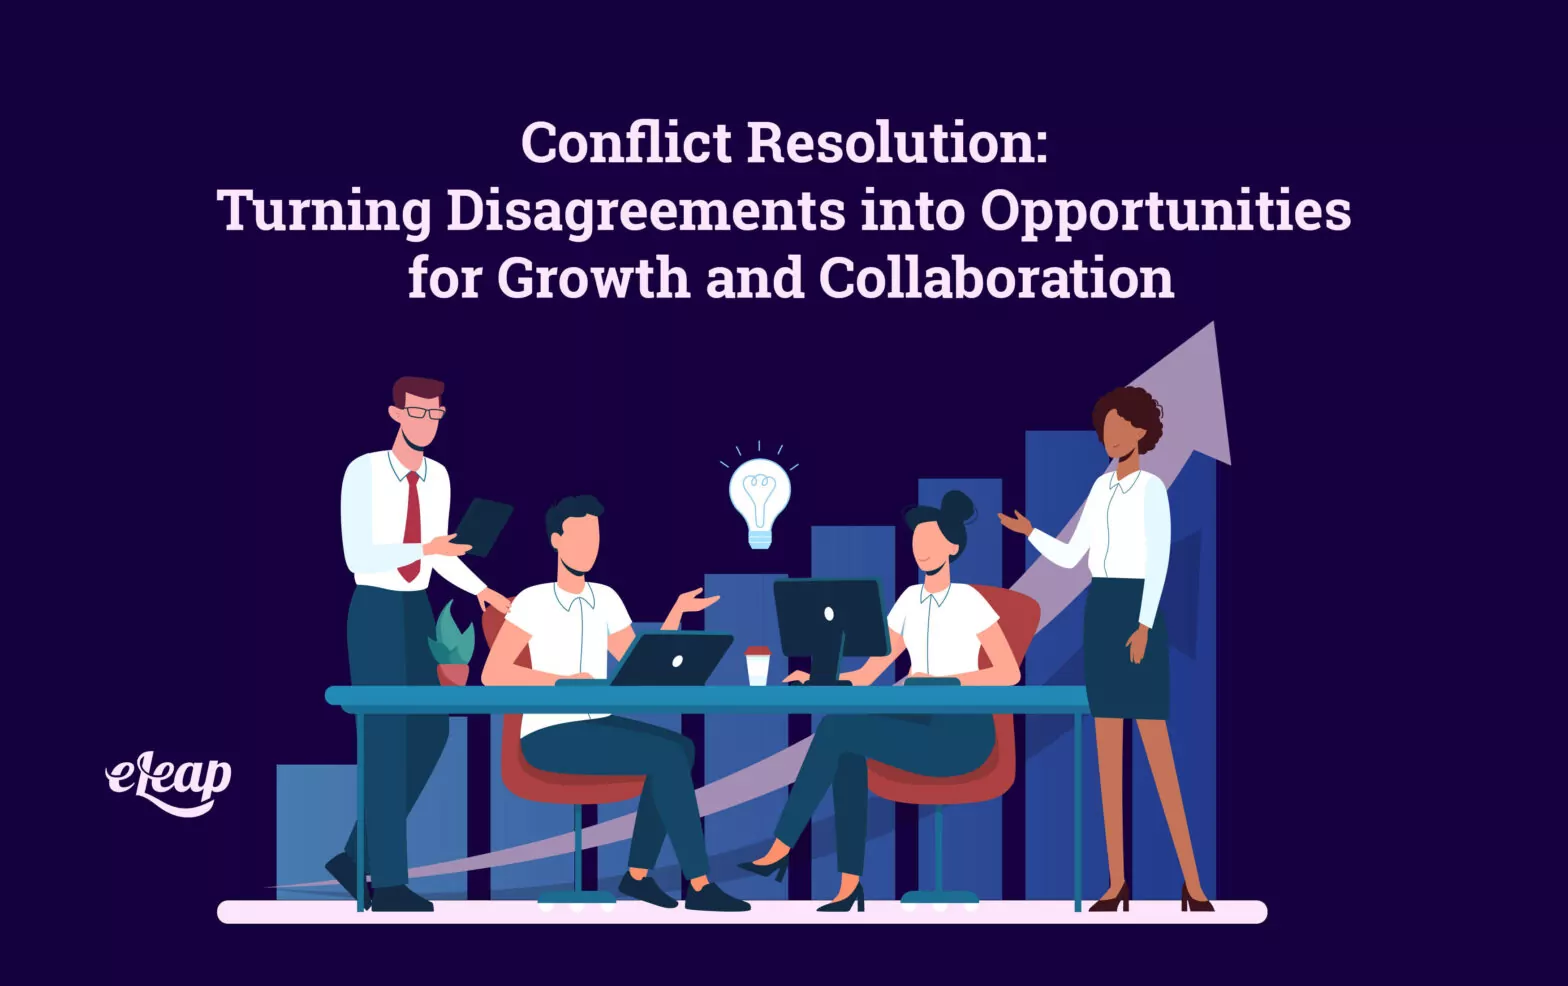 Conflict Resolution: Turning Disagreements into Opportunities for Growth and Collaboration